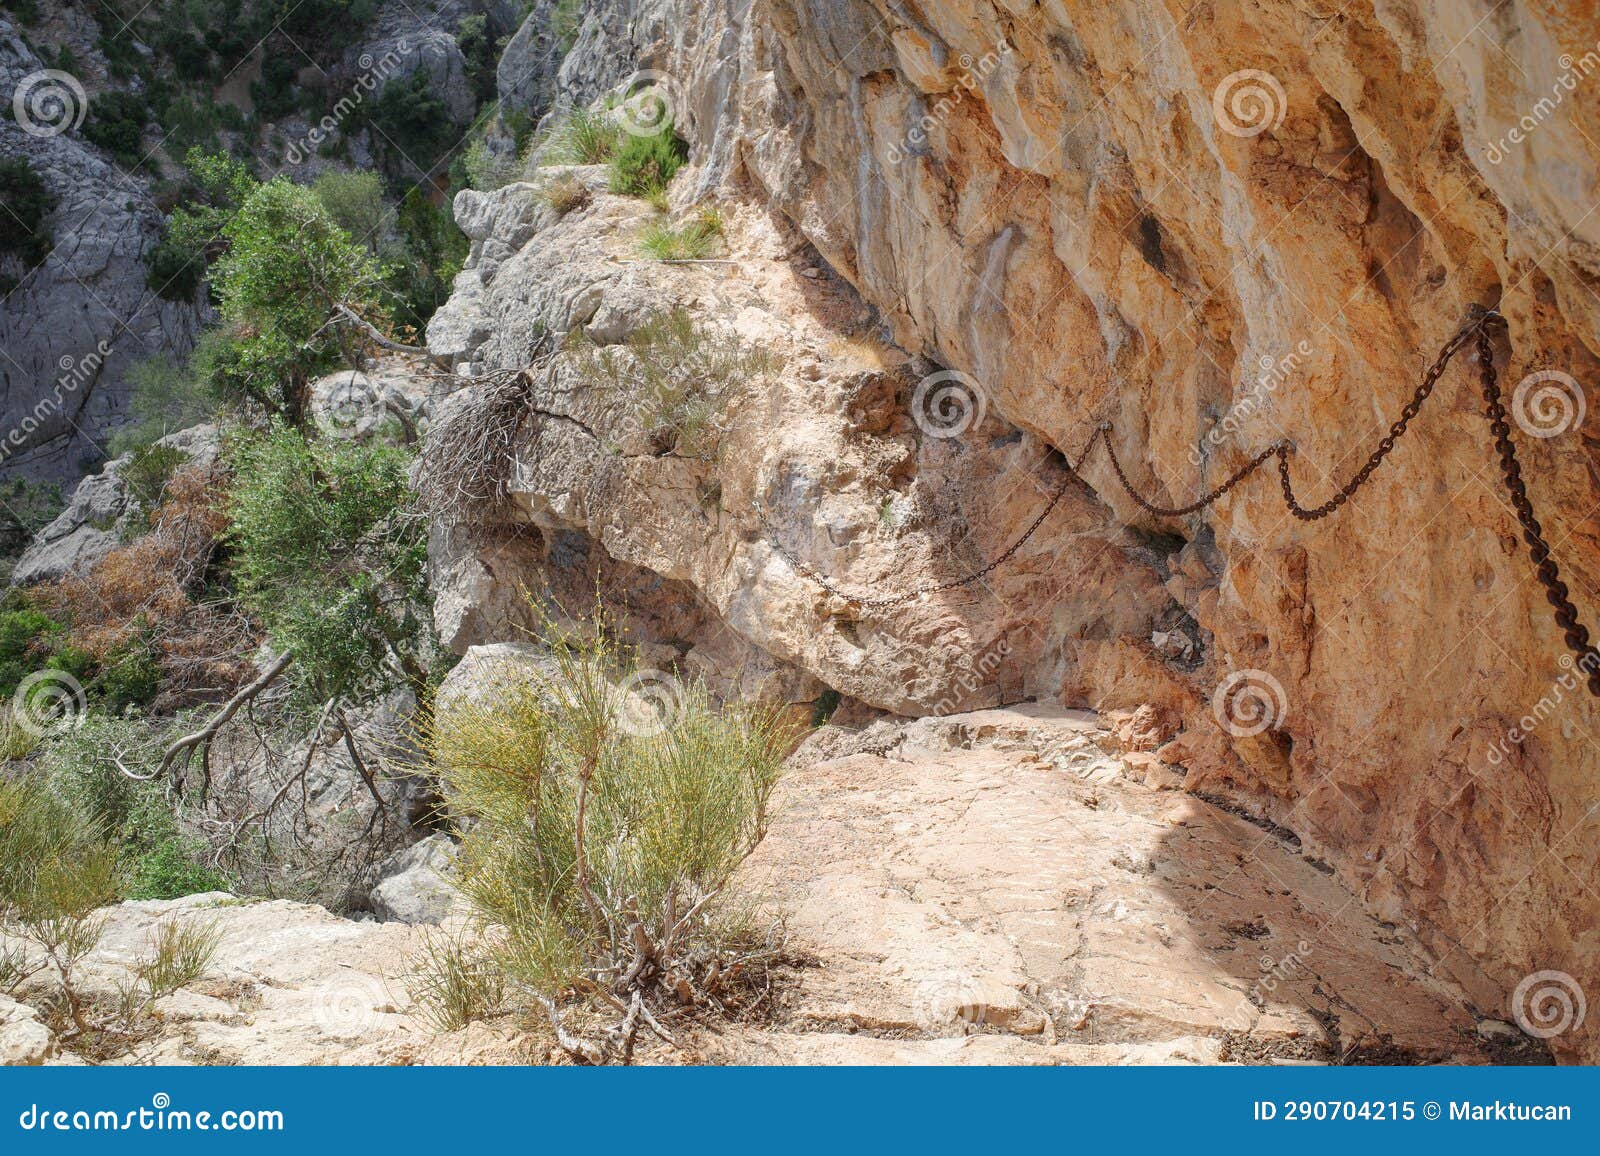 mallorca, spain - 12 june, 2023: chain railings on a steep section of the gr221 hiking trail in the tramontana mountains, mallorca